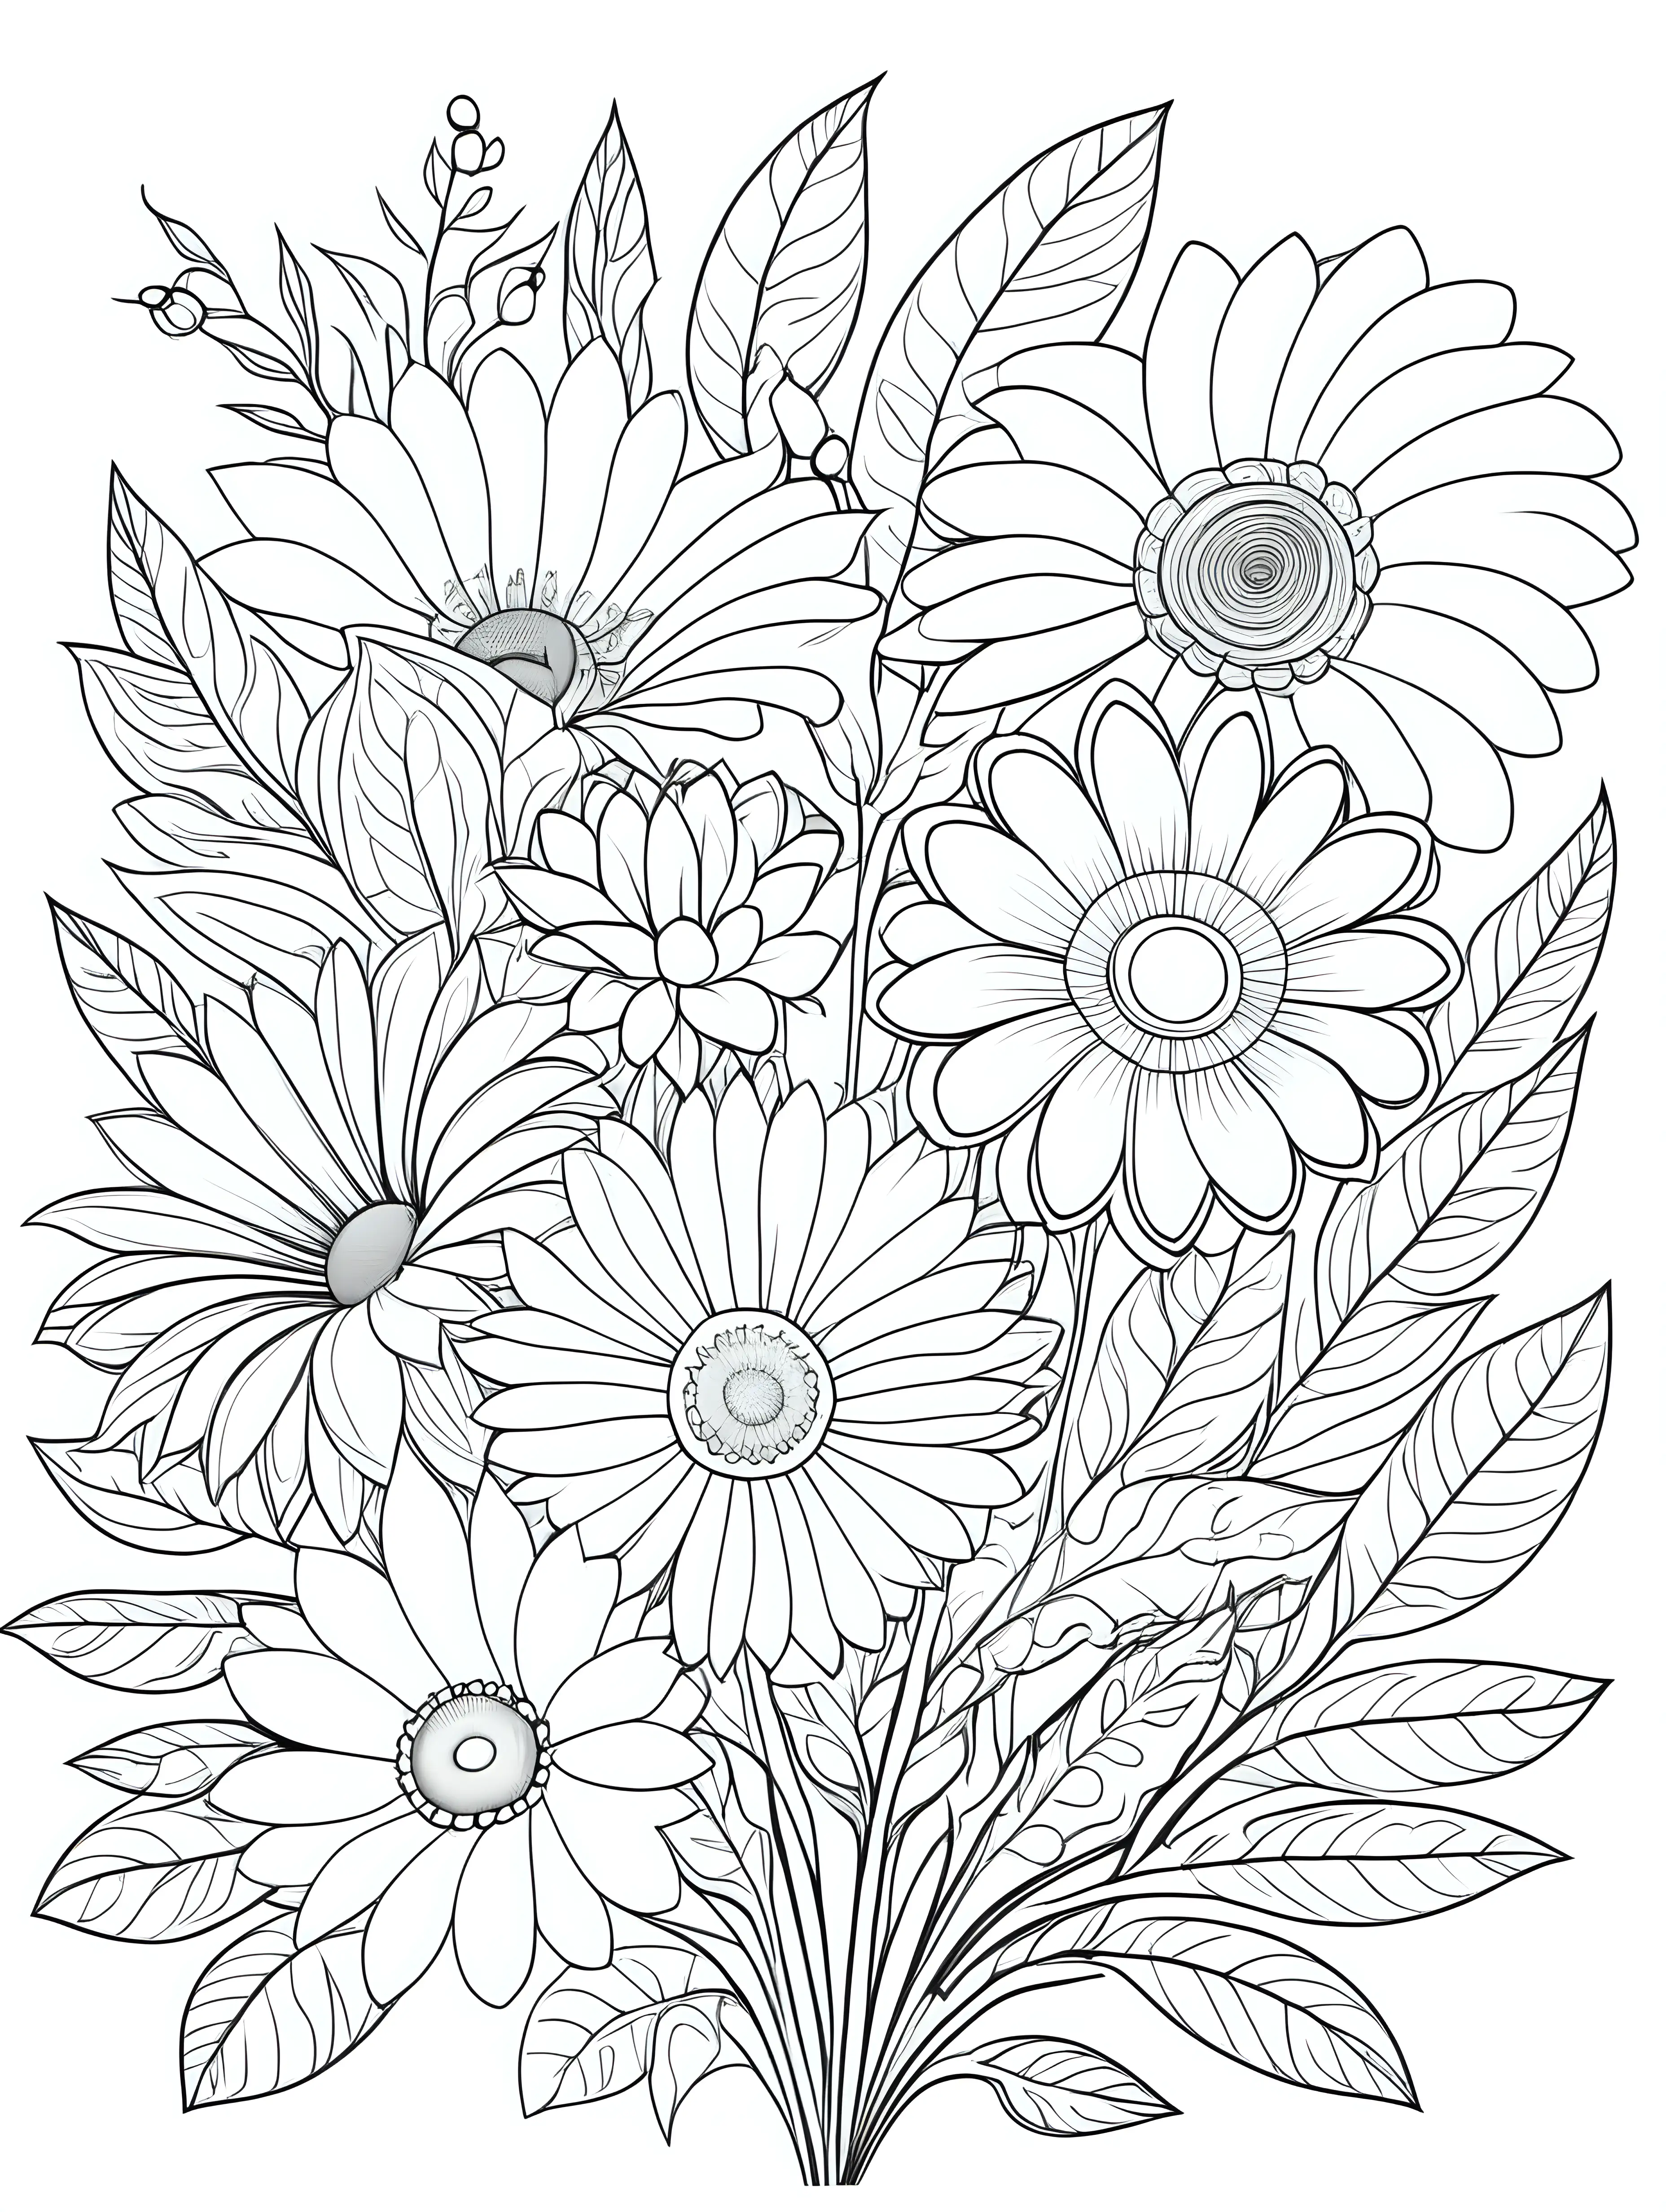 Floral Harmony Coloring Page